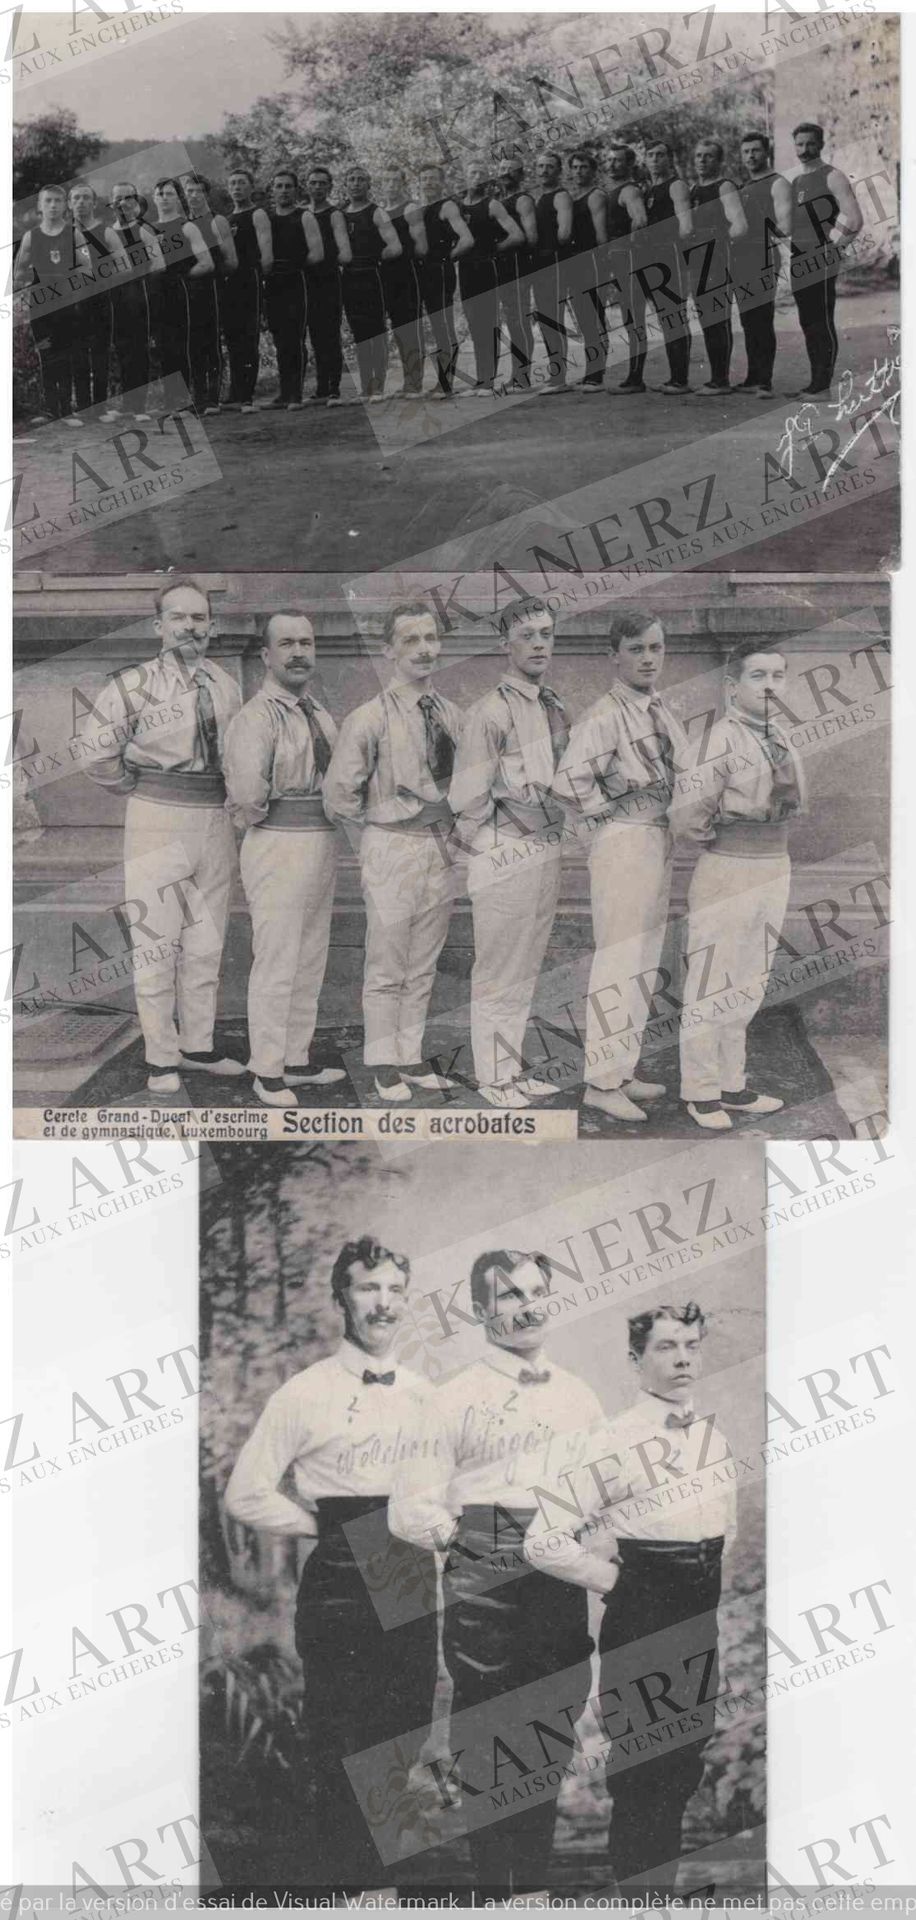 Null (SPORT/GYMNASTICS) 1. Photo card of a team of adult male gymnasts, J.P.Lutt&hellip;